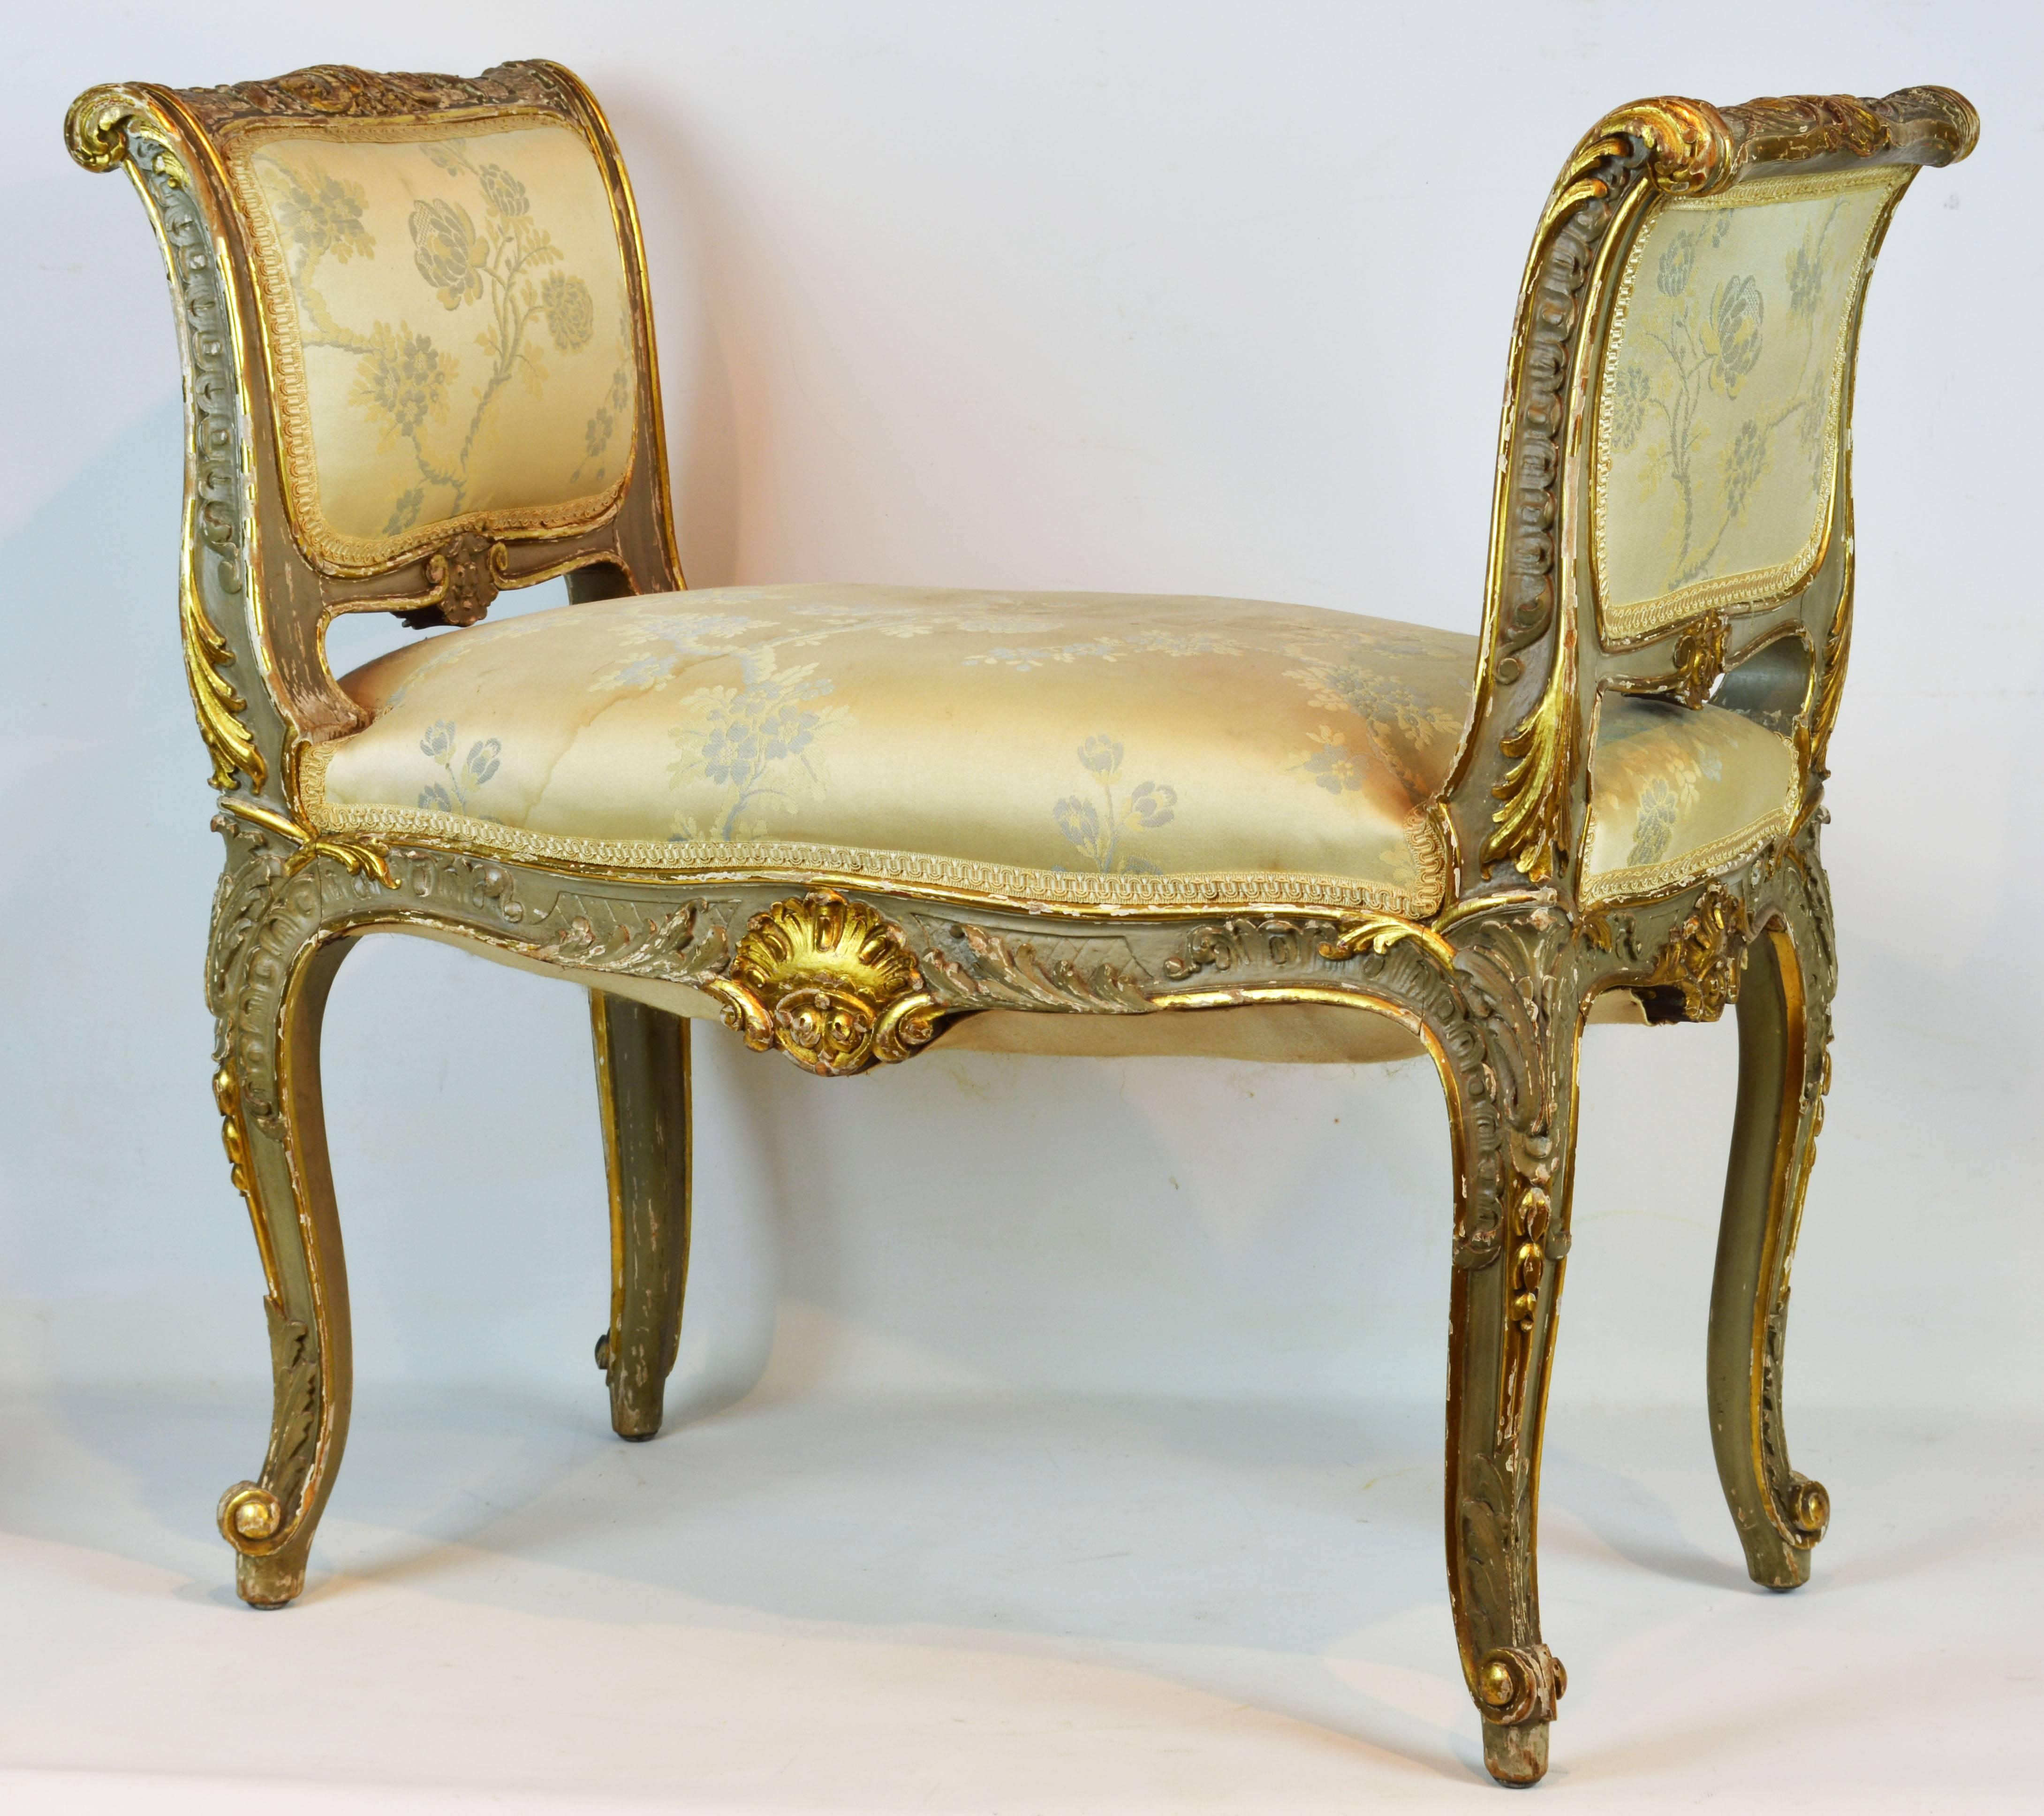 A charming bench with cabriole legs in the Rococo style richly carved with gilt leaf work and scrolls centering fine shell carvings on both sides.